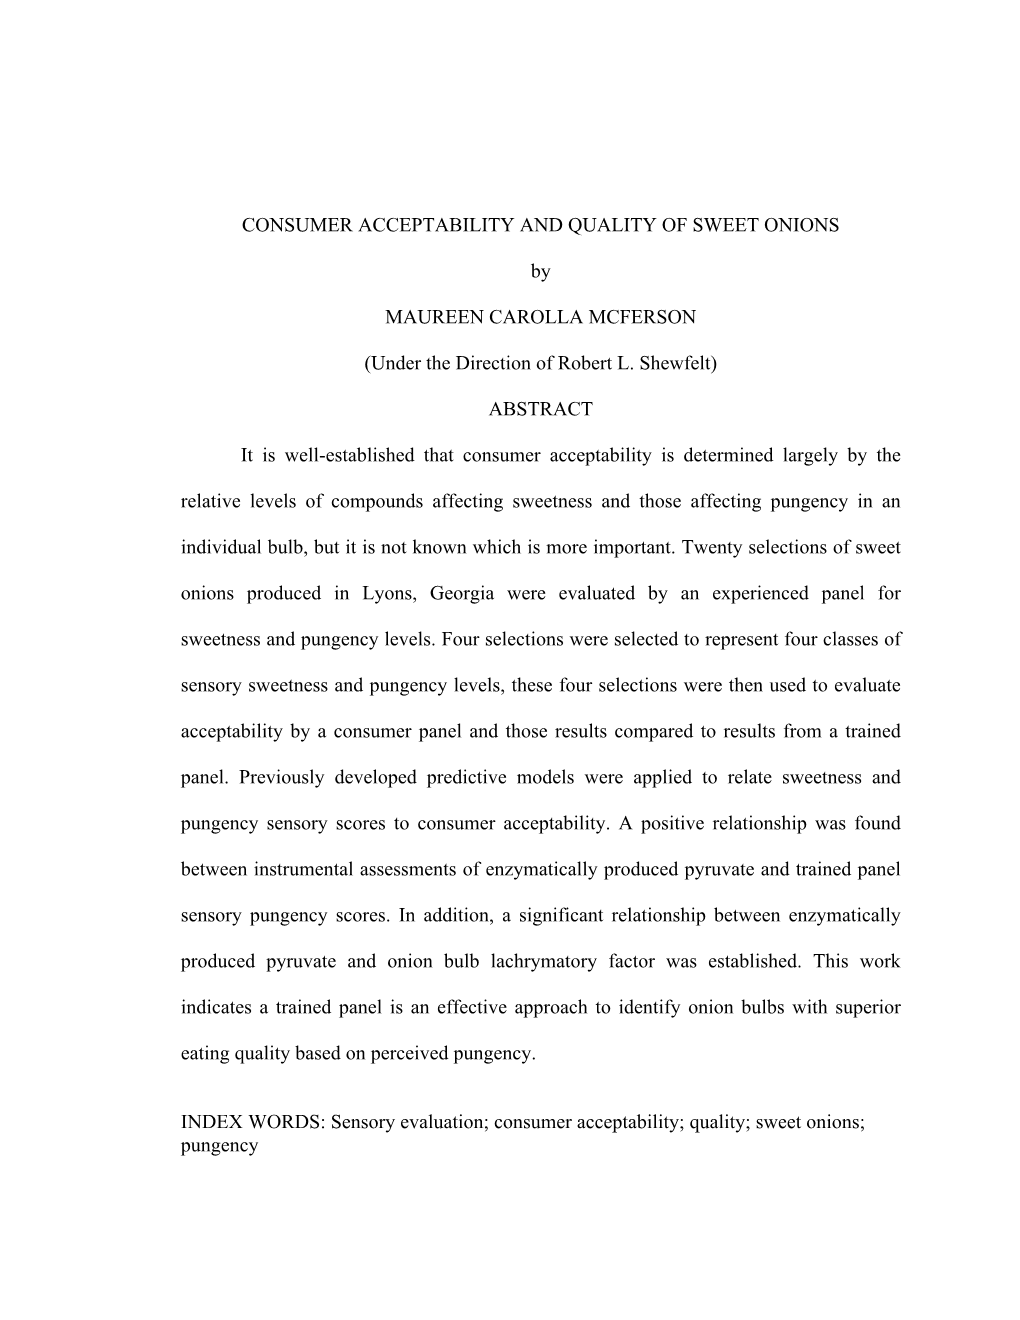 CONSUMER ACCEPTABILITY and QUALITY of SWEET ONIONS By